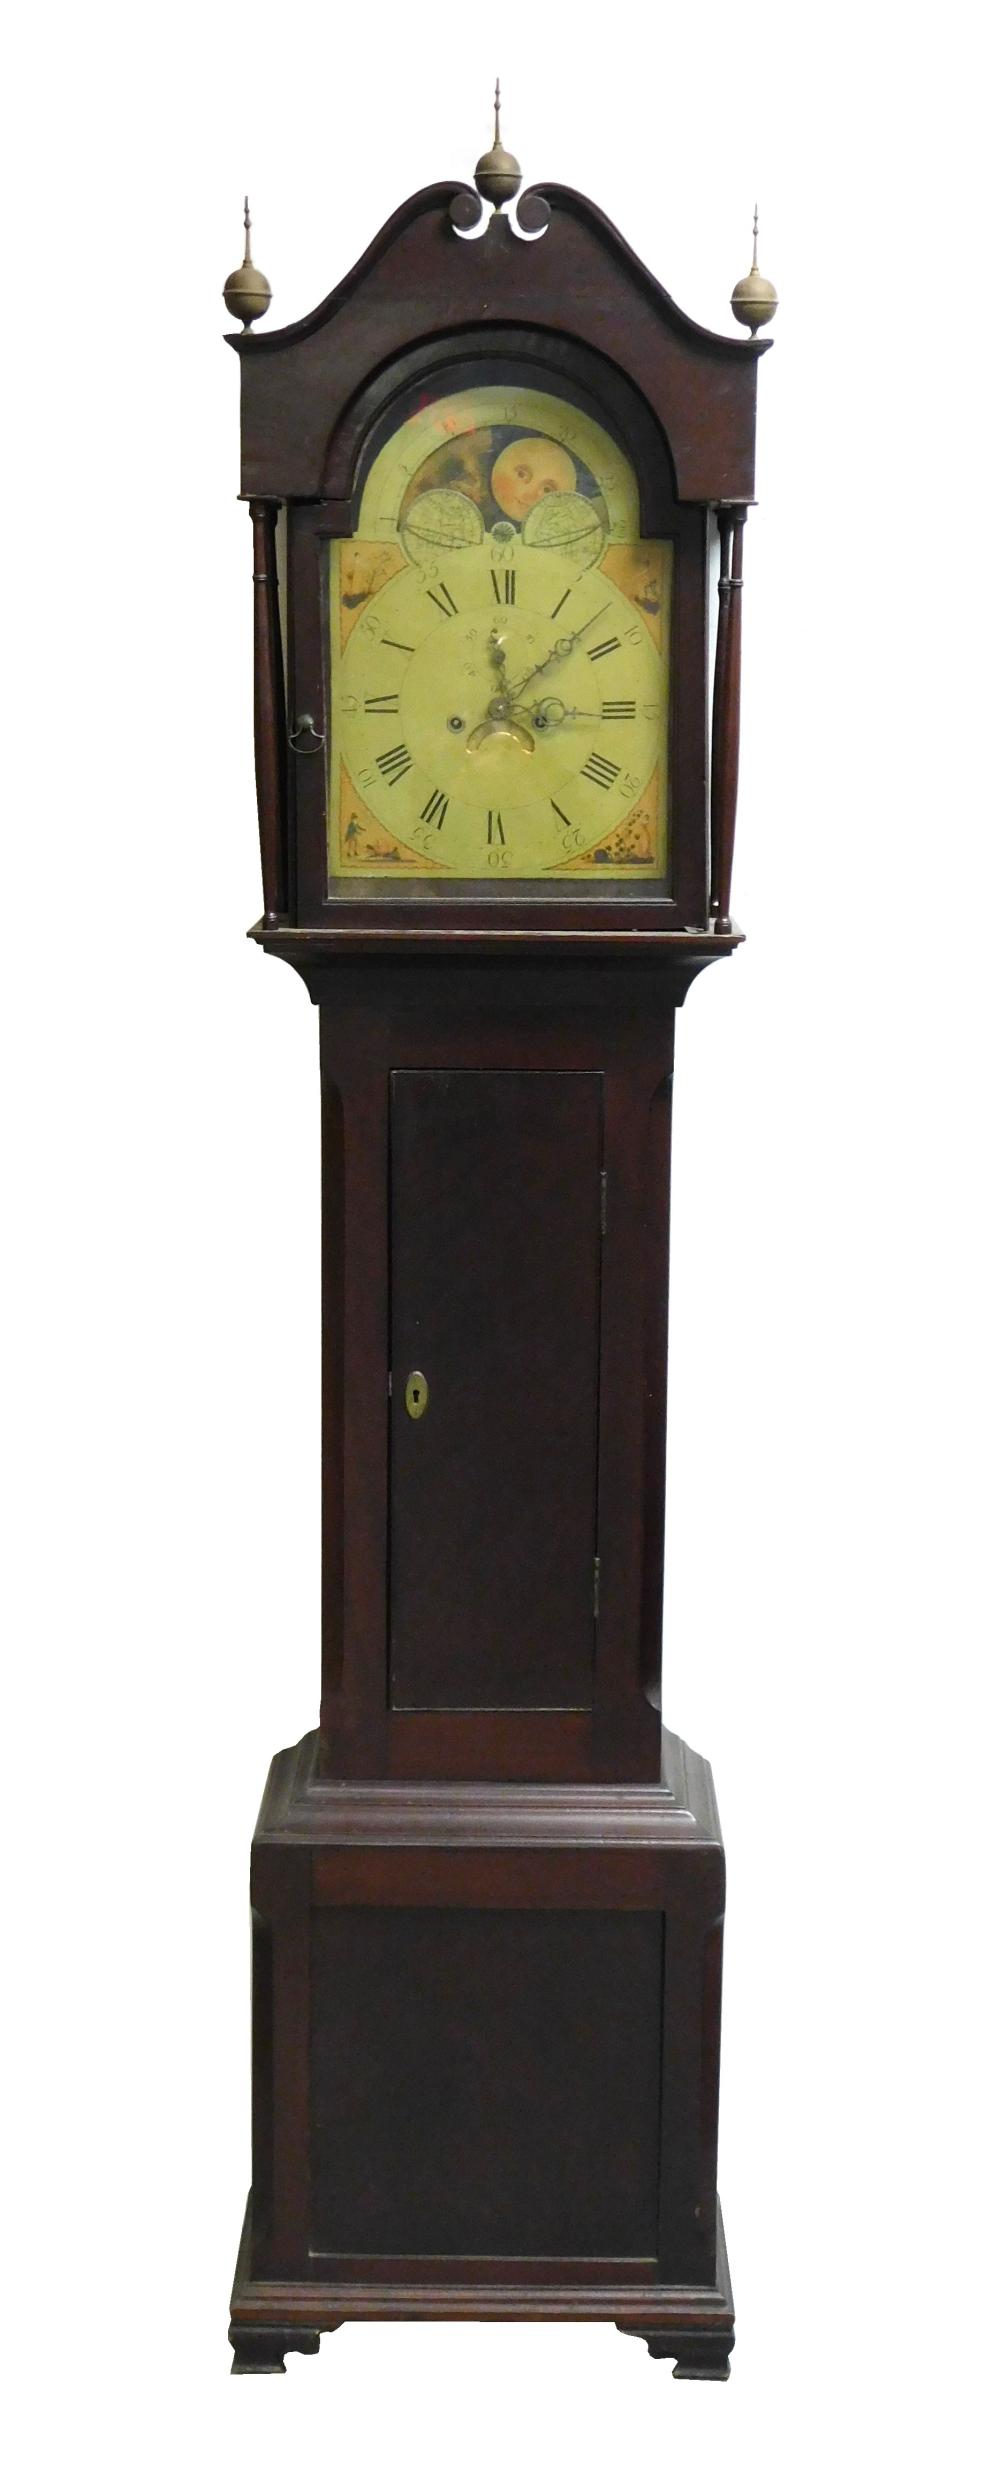 TALL CASE CLOCK, C. 1820, LIKELY